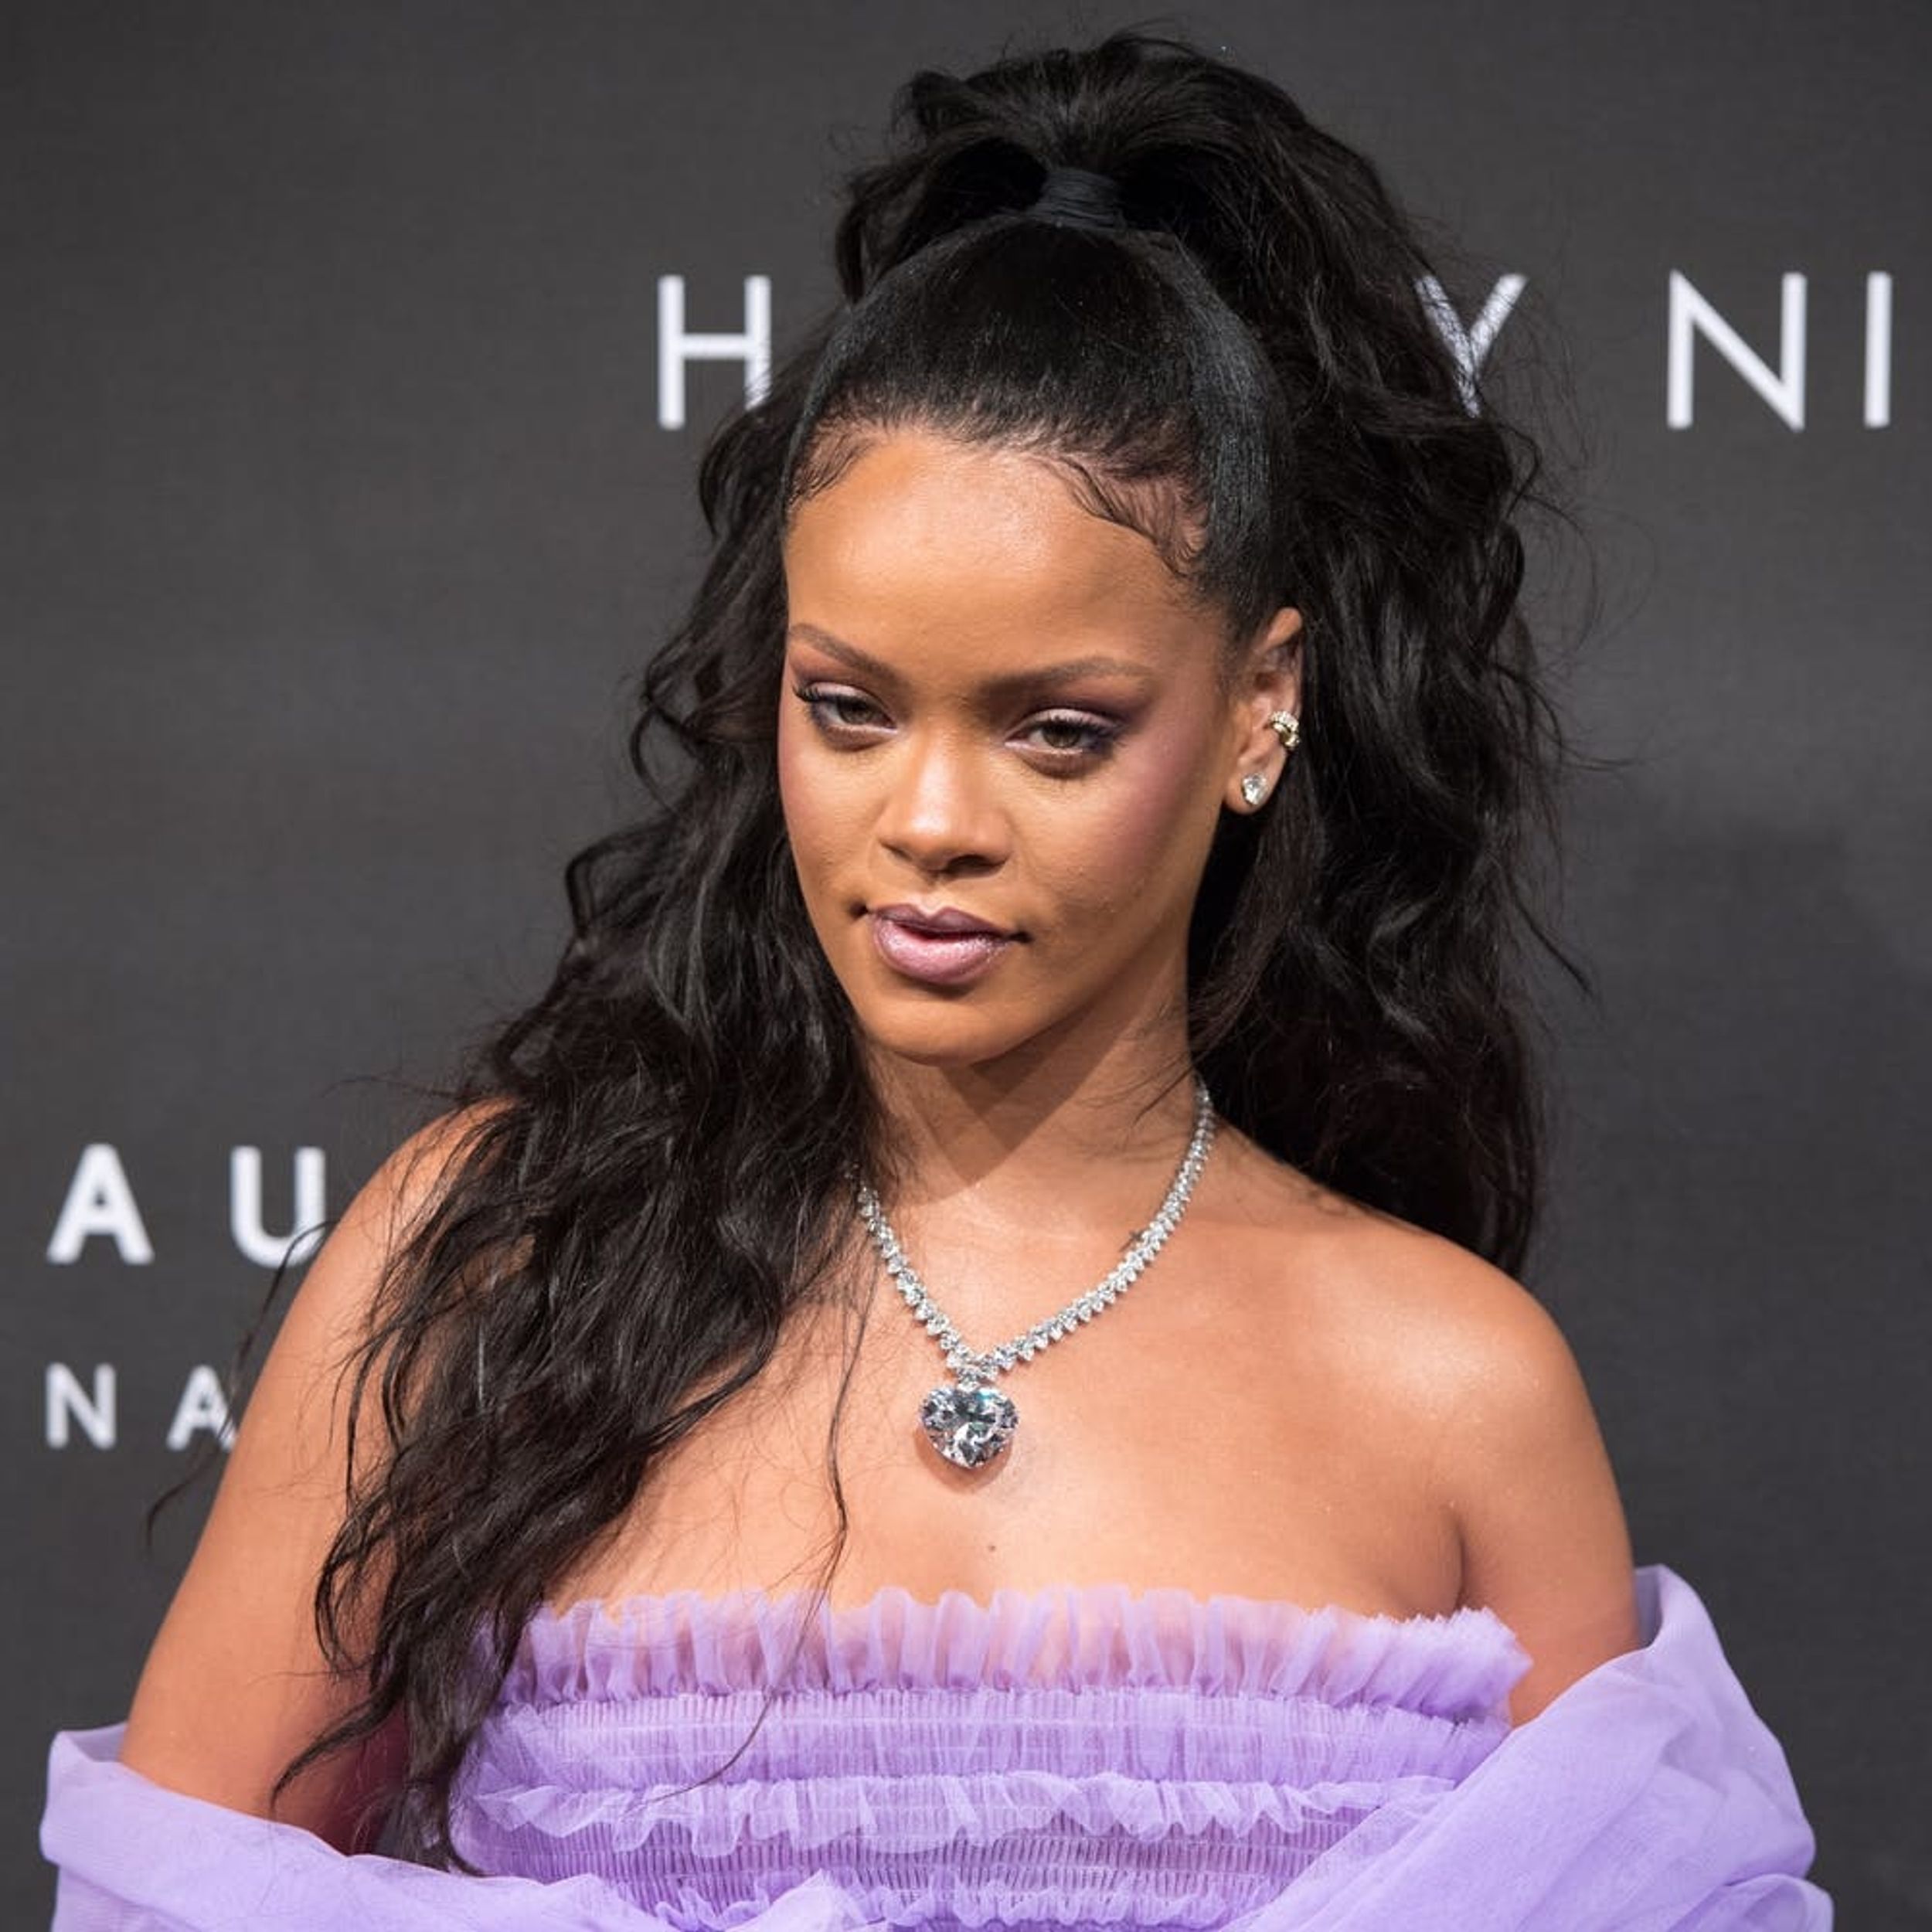 Some People Are Freaking Out After Learning Rihanna’s Last Name Is Fenty